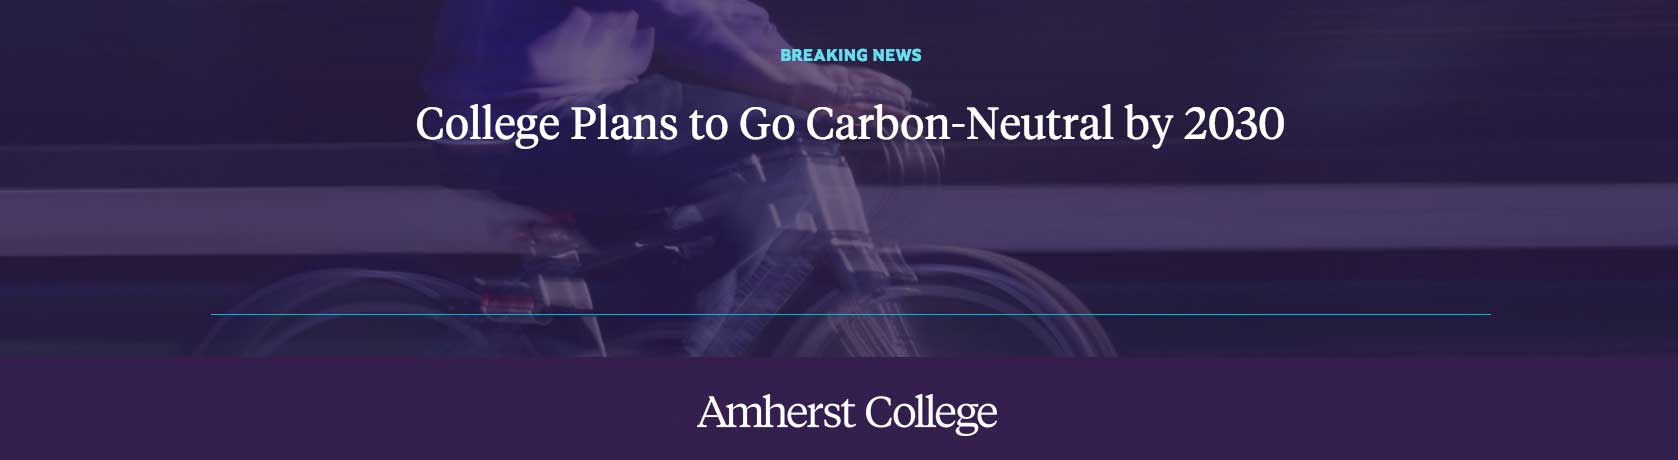 Amherst College plans to go carbon-neutral by 2030